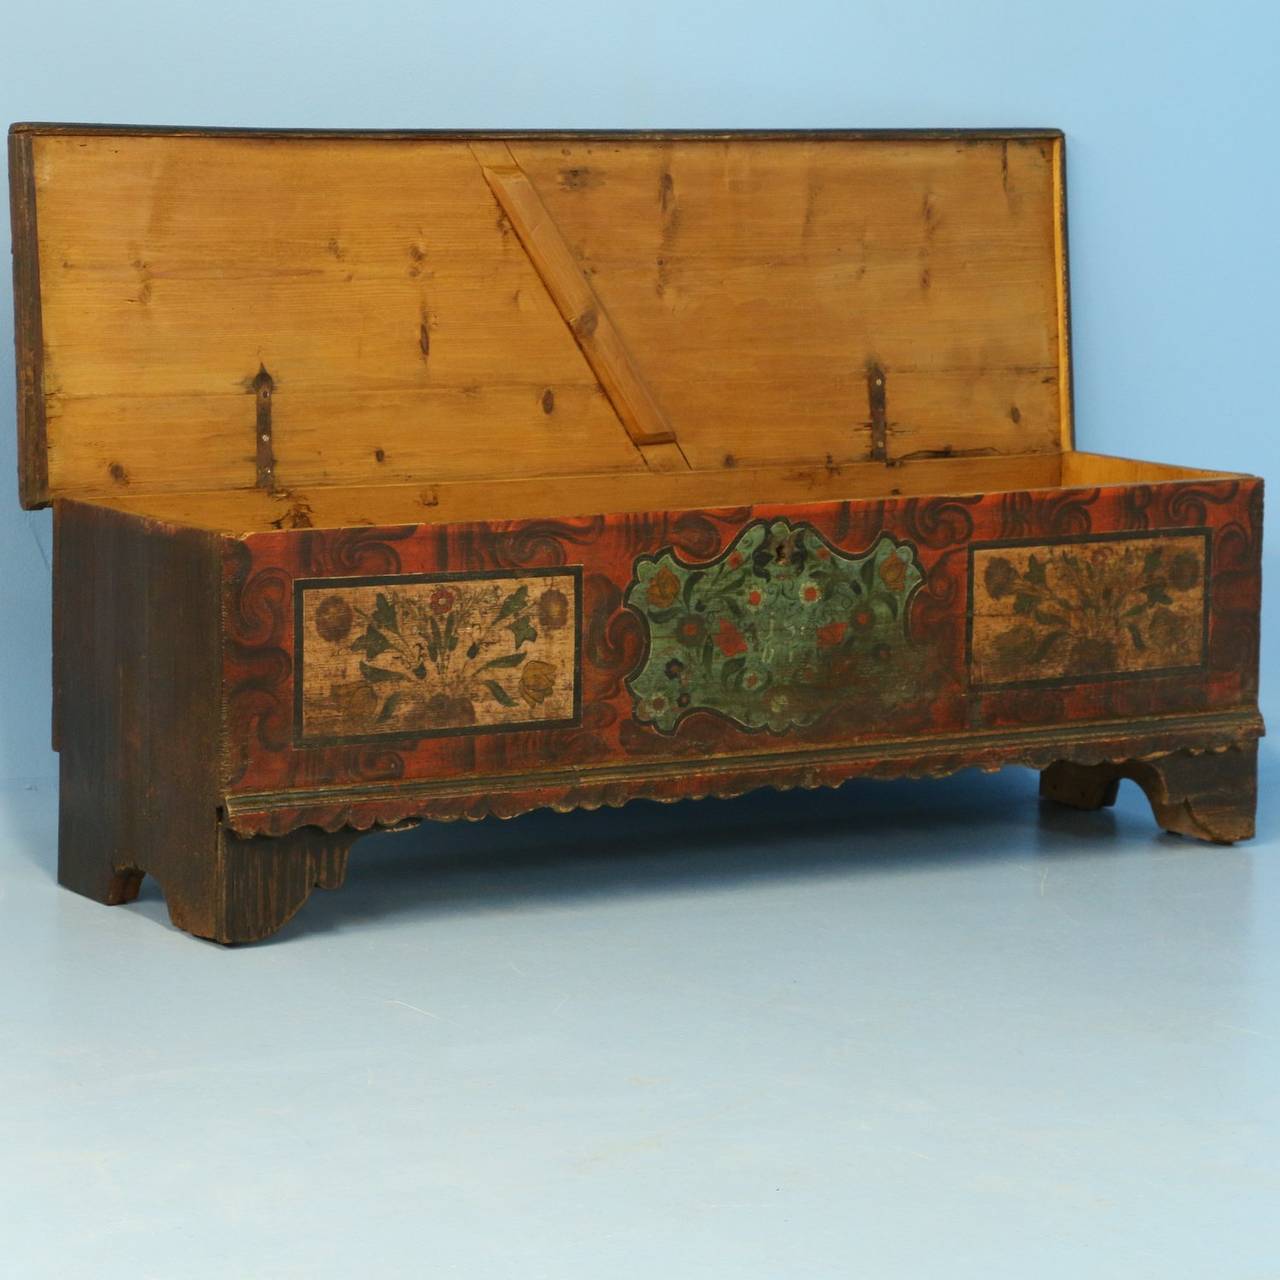 The lovely paint is all original on this narrow trunk from Romania. Please examine the close up photos to appreciate the soft color palette and folk art floral patterns within the 3 painted panels of the front. The date of 1867 can be seen in the